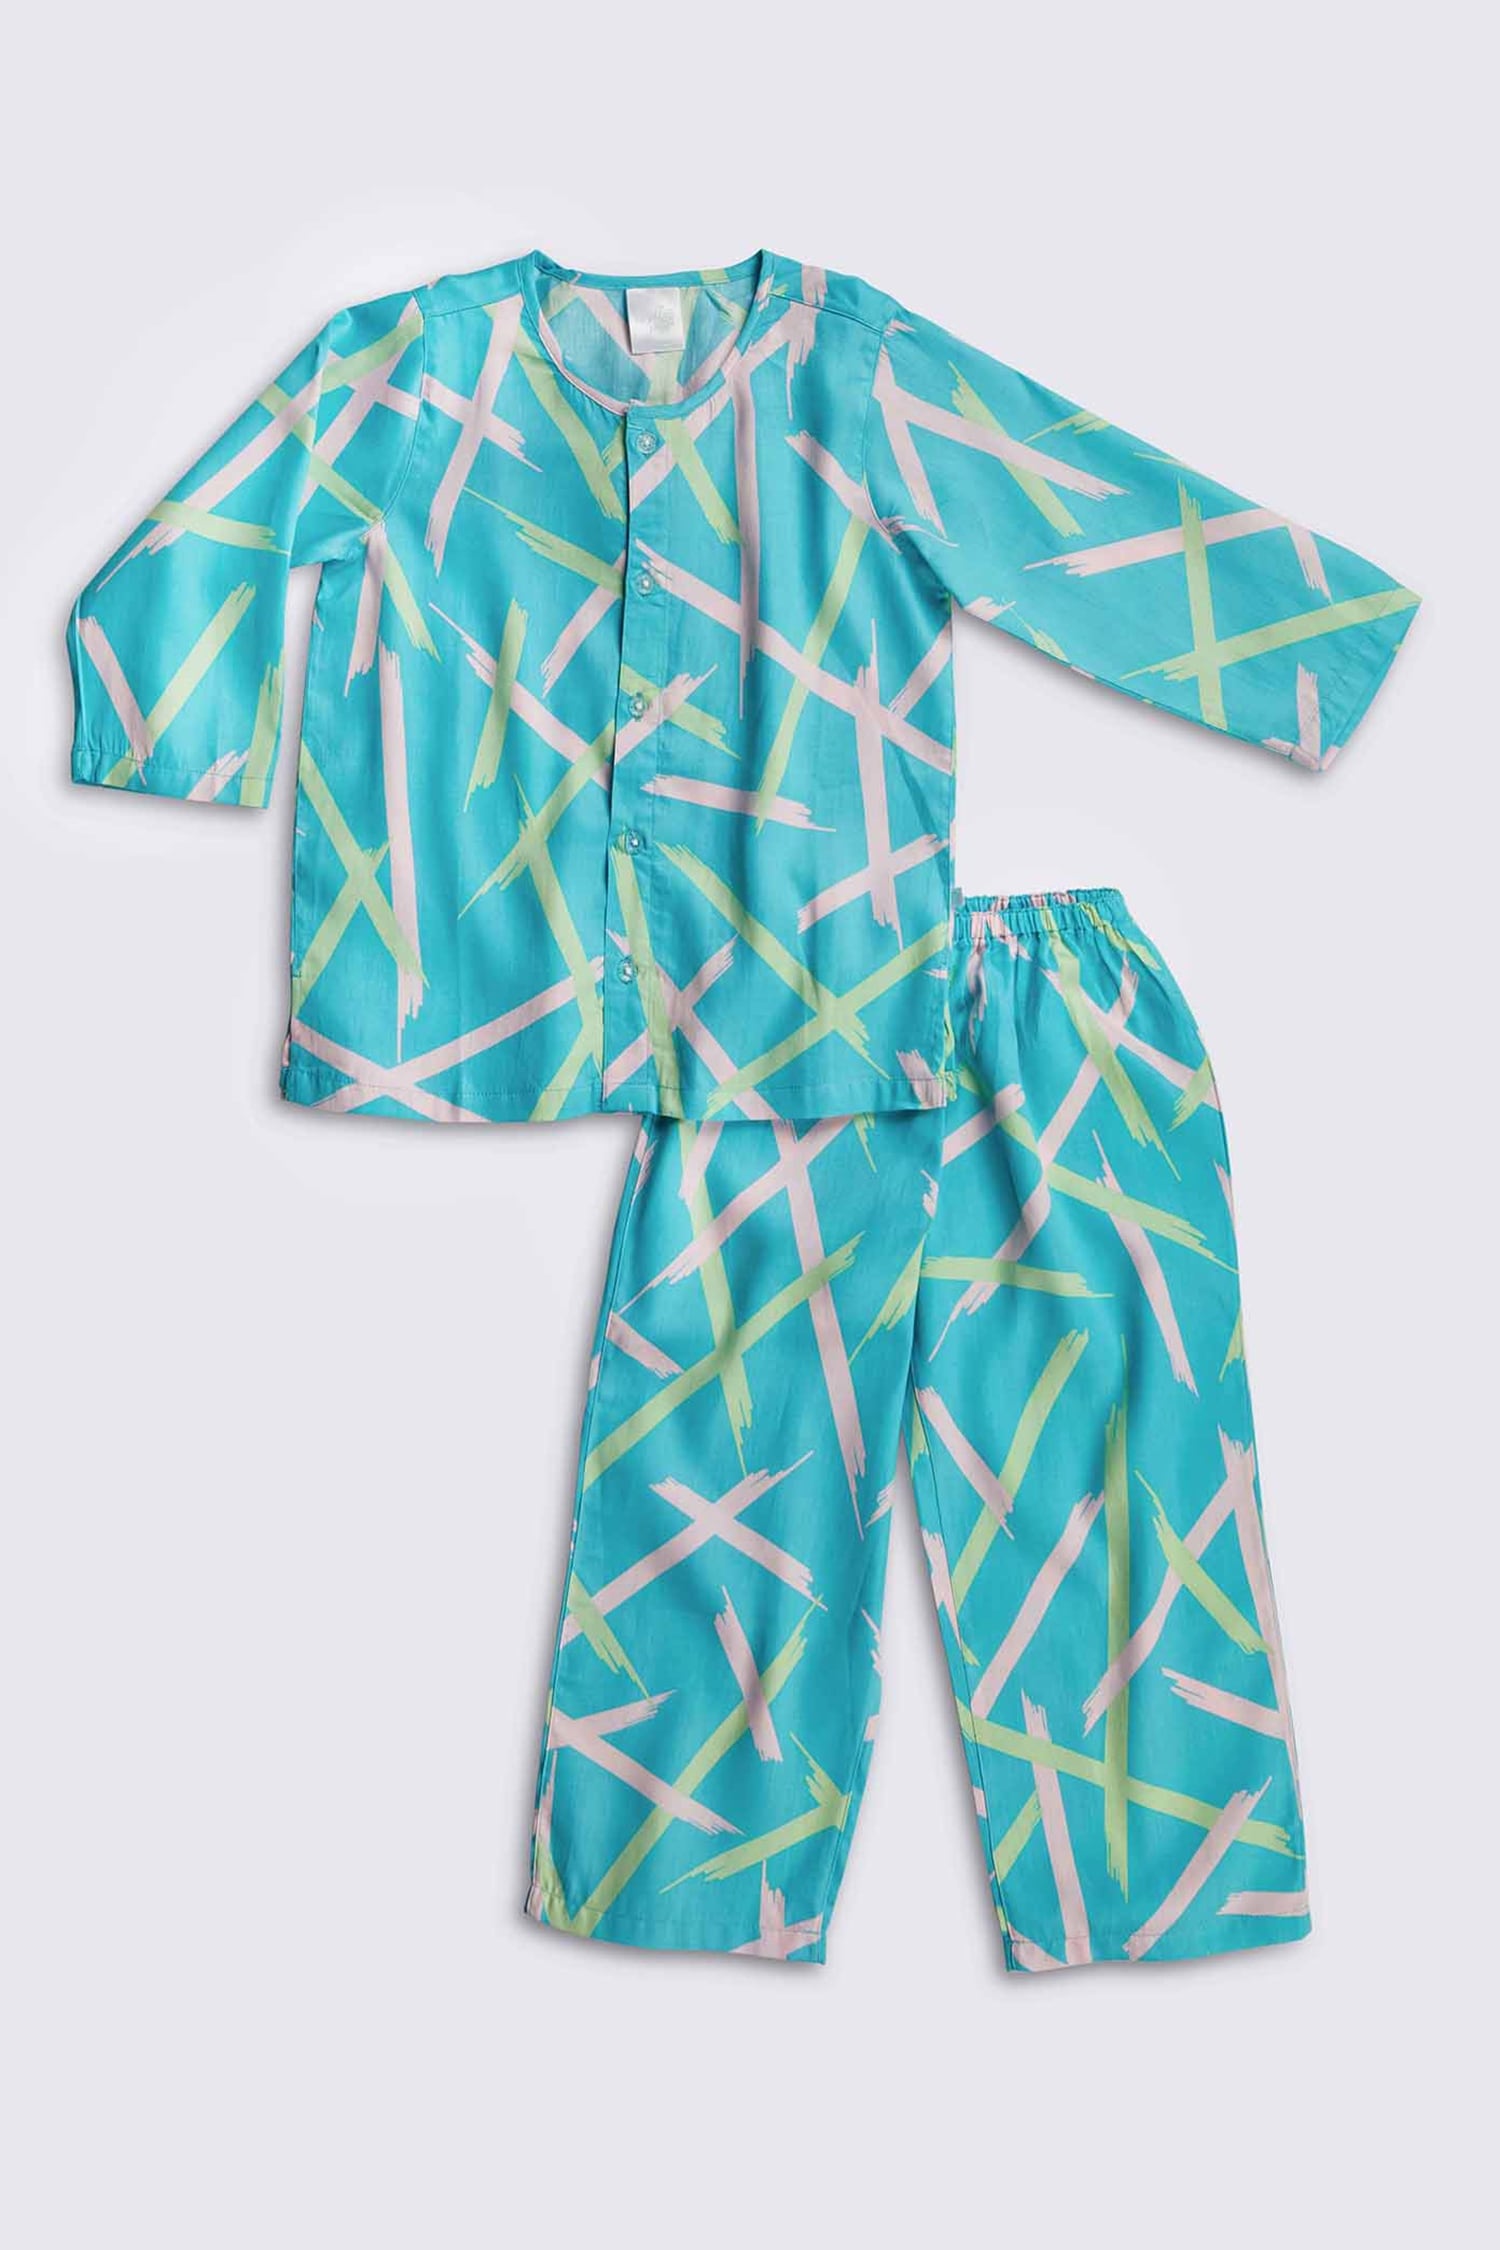 Green Color Printed Summer Night Suit | Night suit, Everyday outfits,  Cotton pyjamas